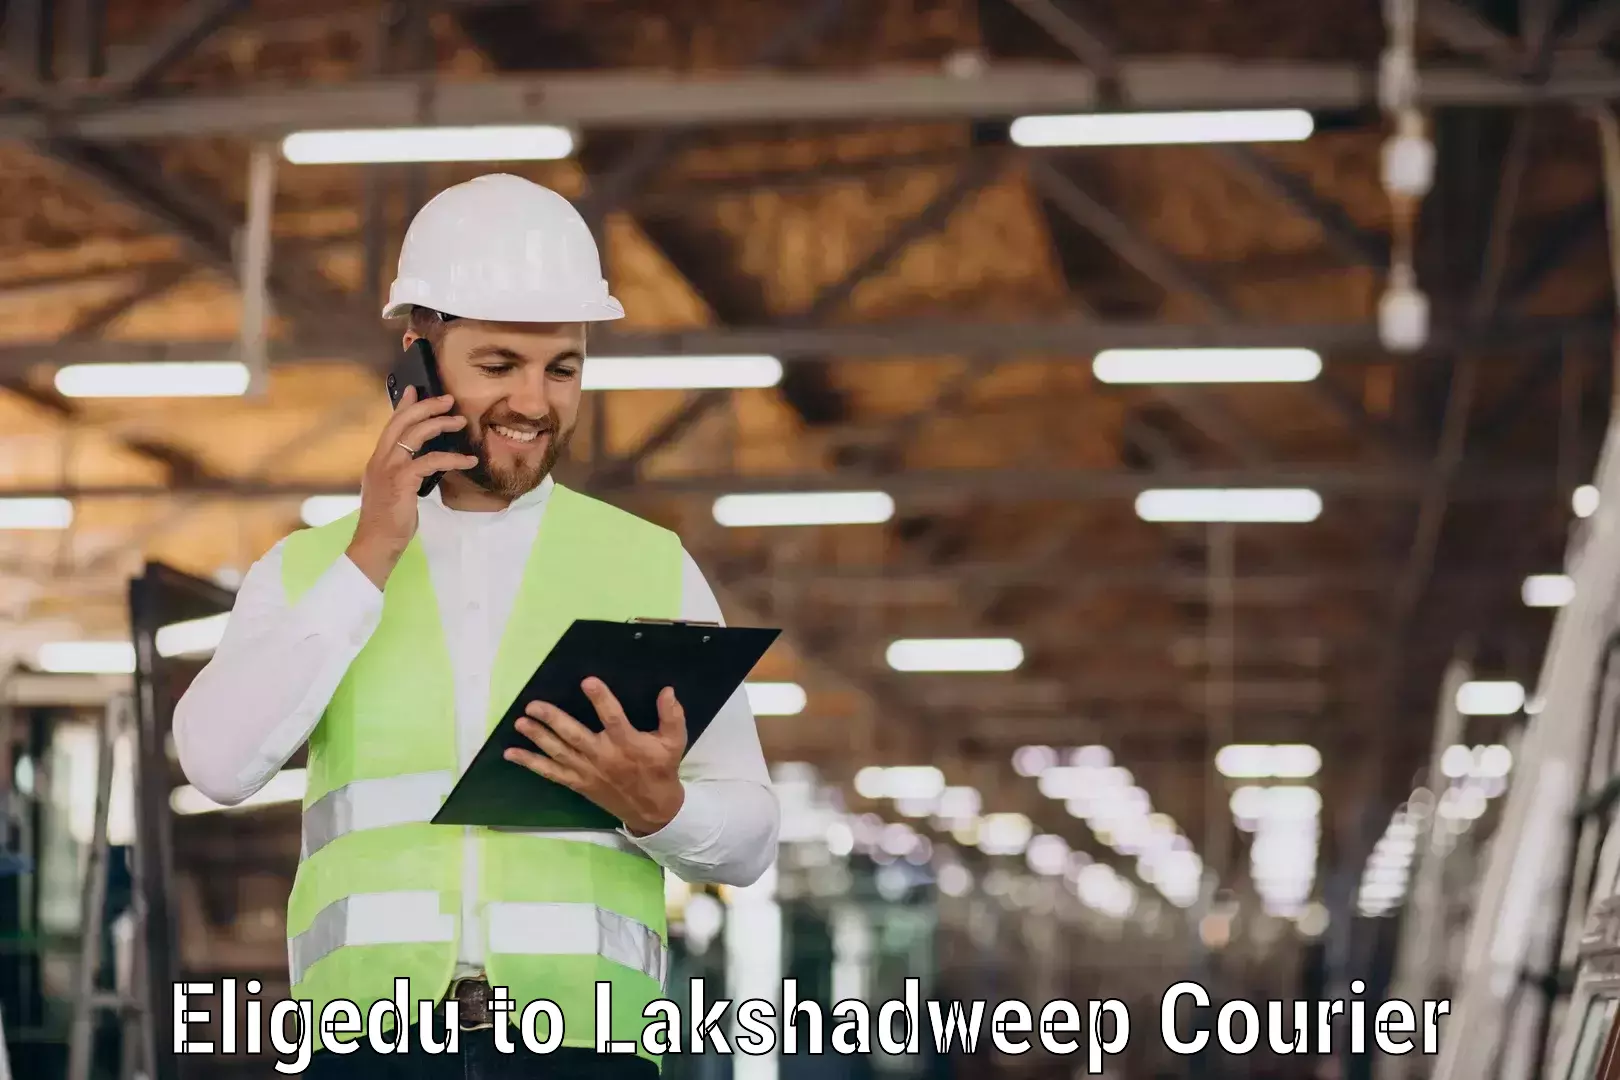 Business delivery service in Eligedu to Lakshadweep